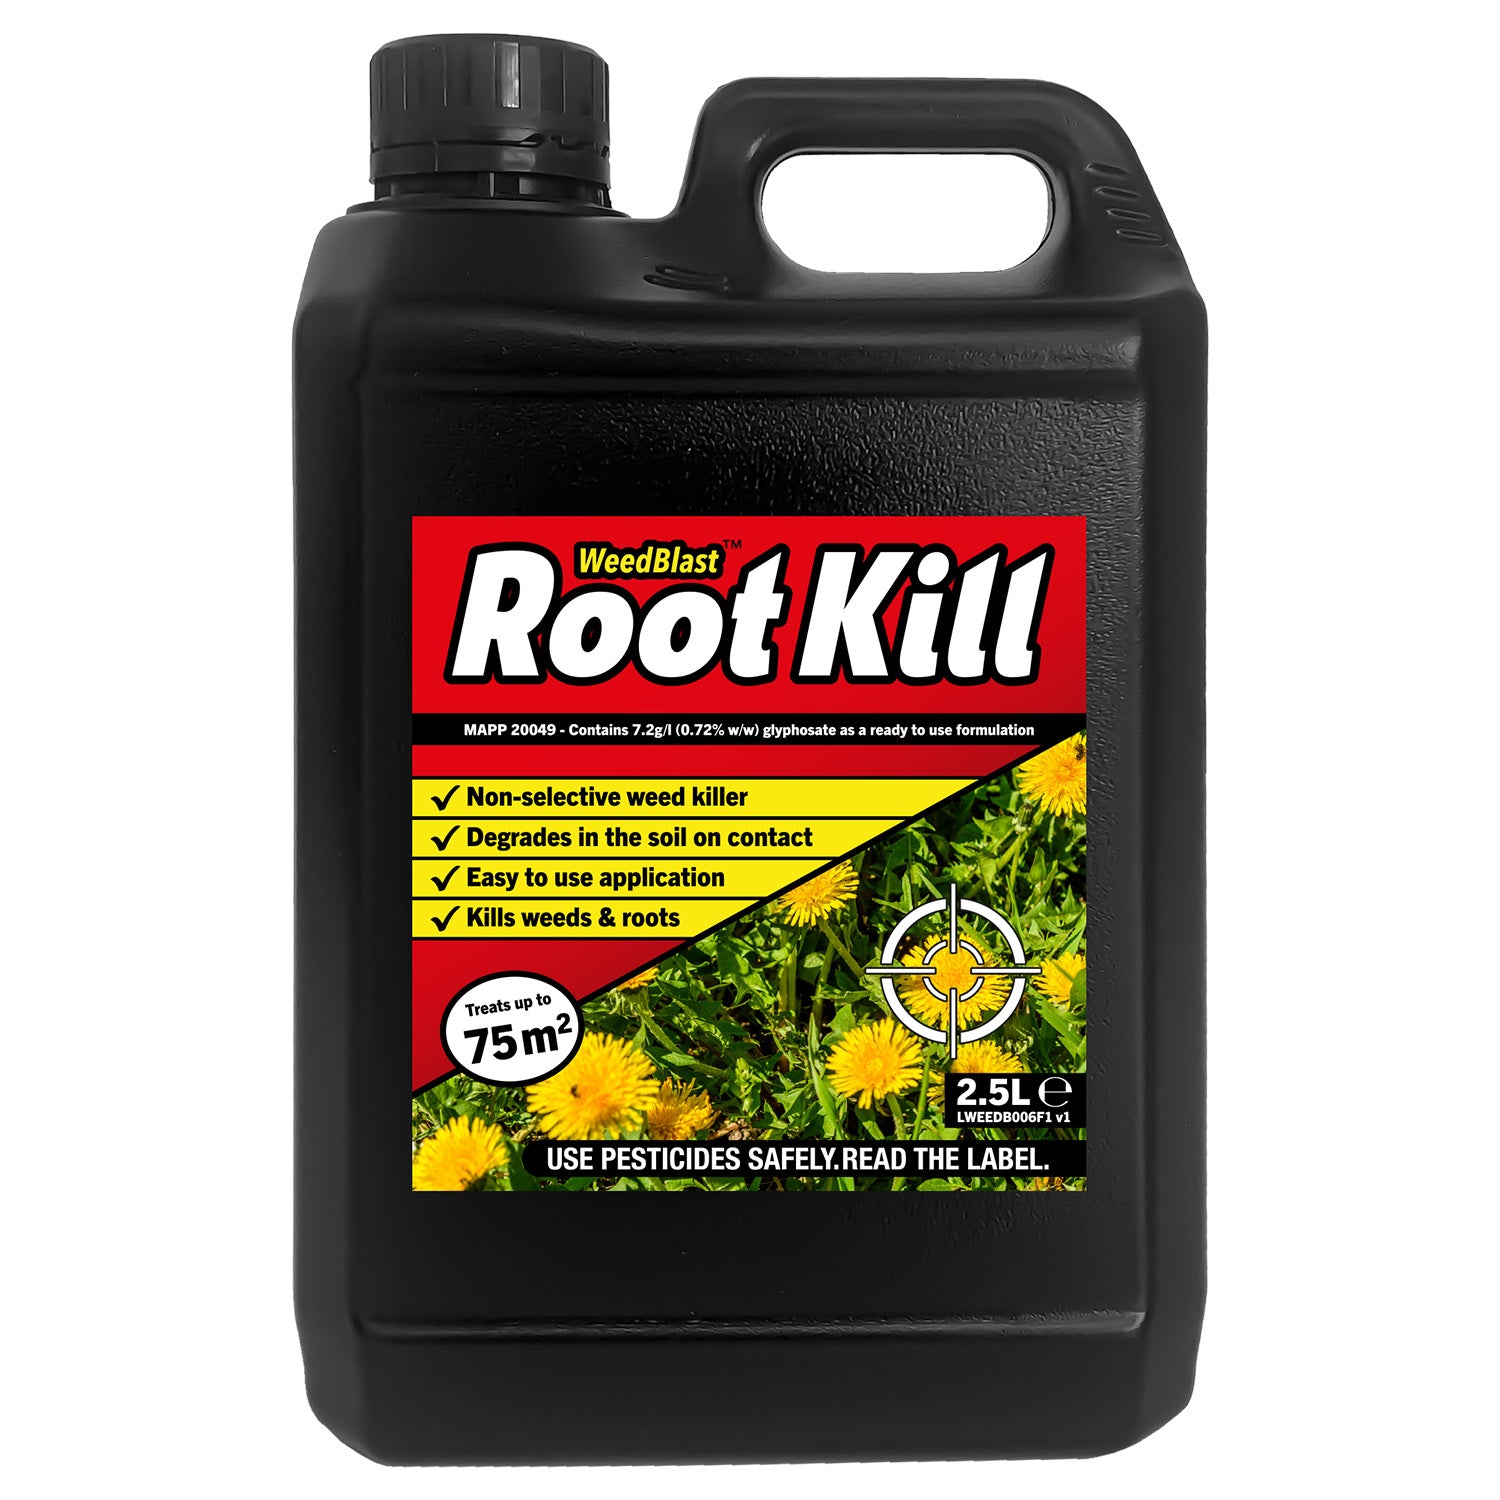 Weedblast RootKill Glyphosate Weedkiller 2 x 2.5 Litre, Ready to use with Long Hose Trigger